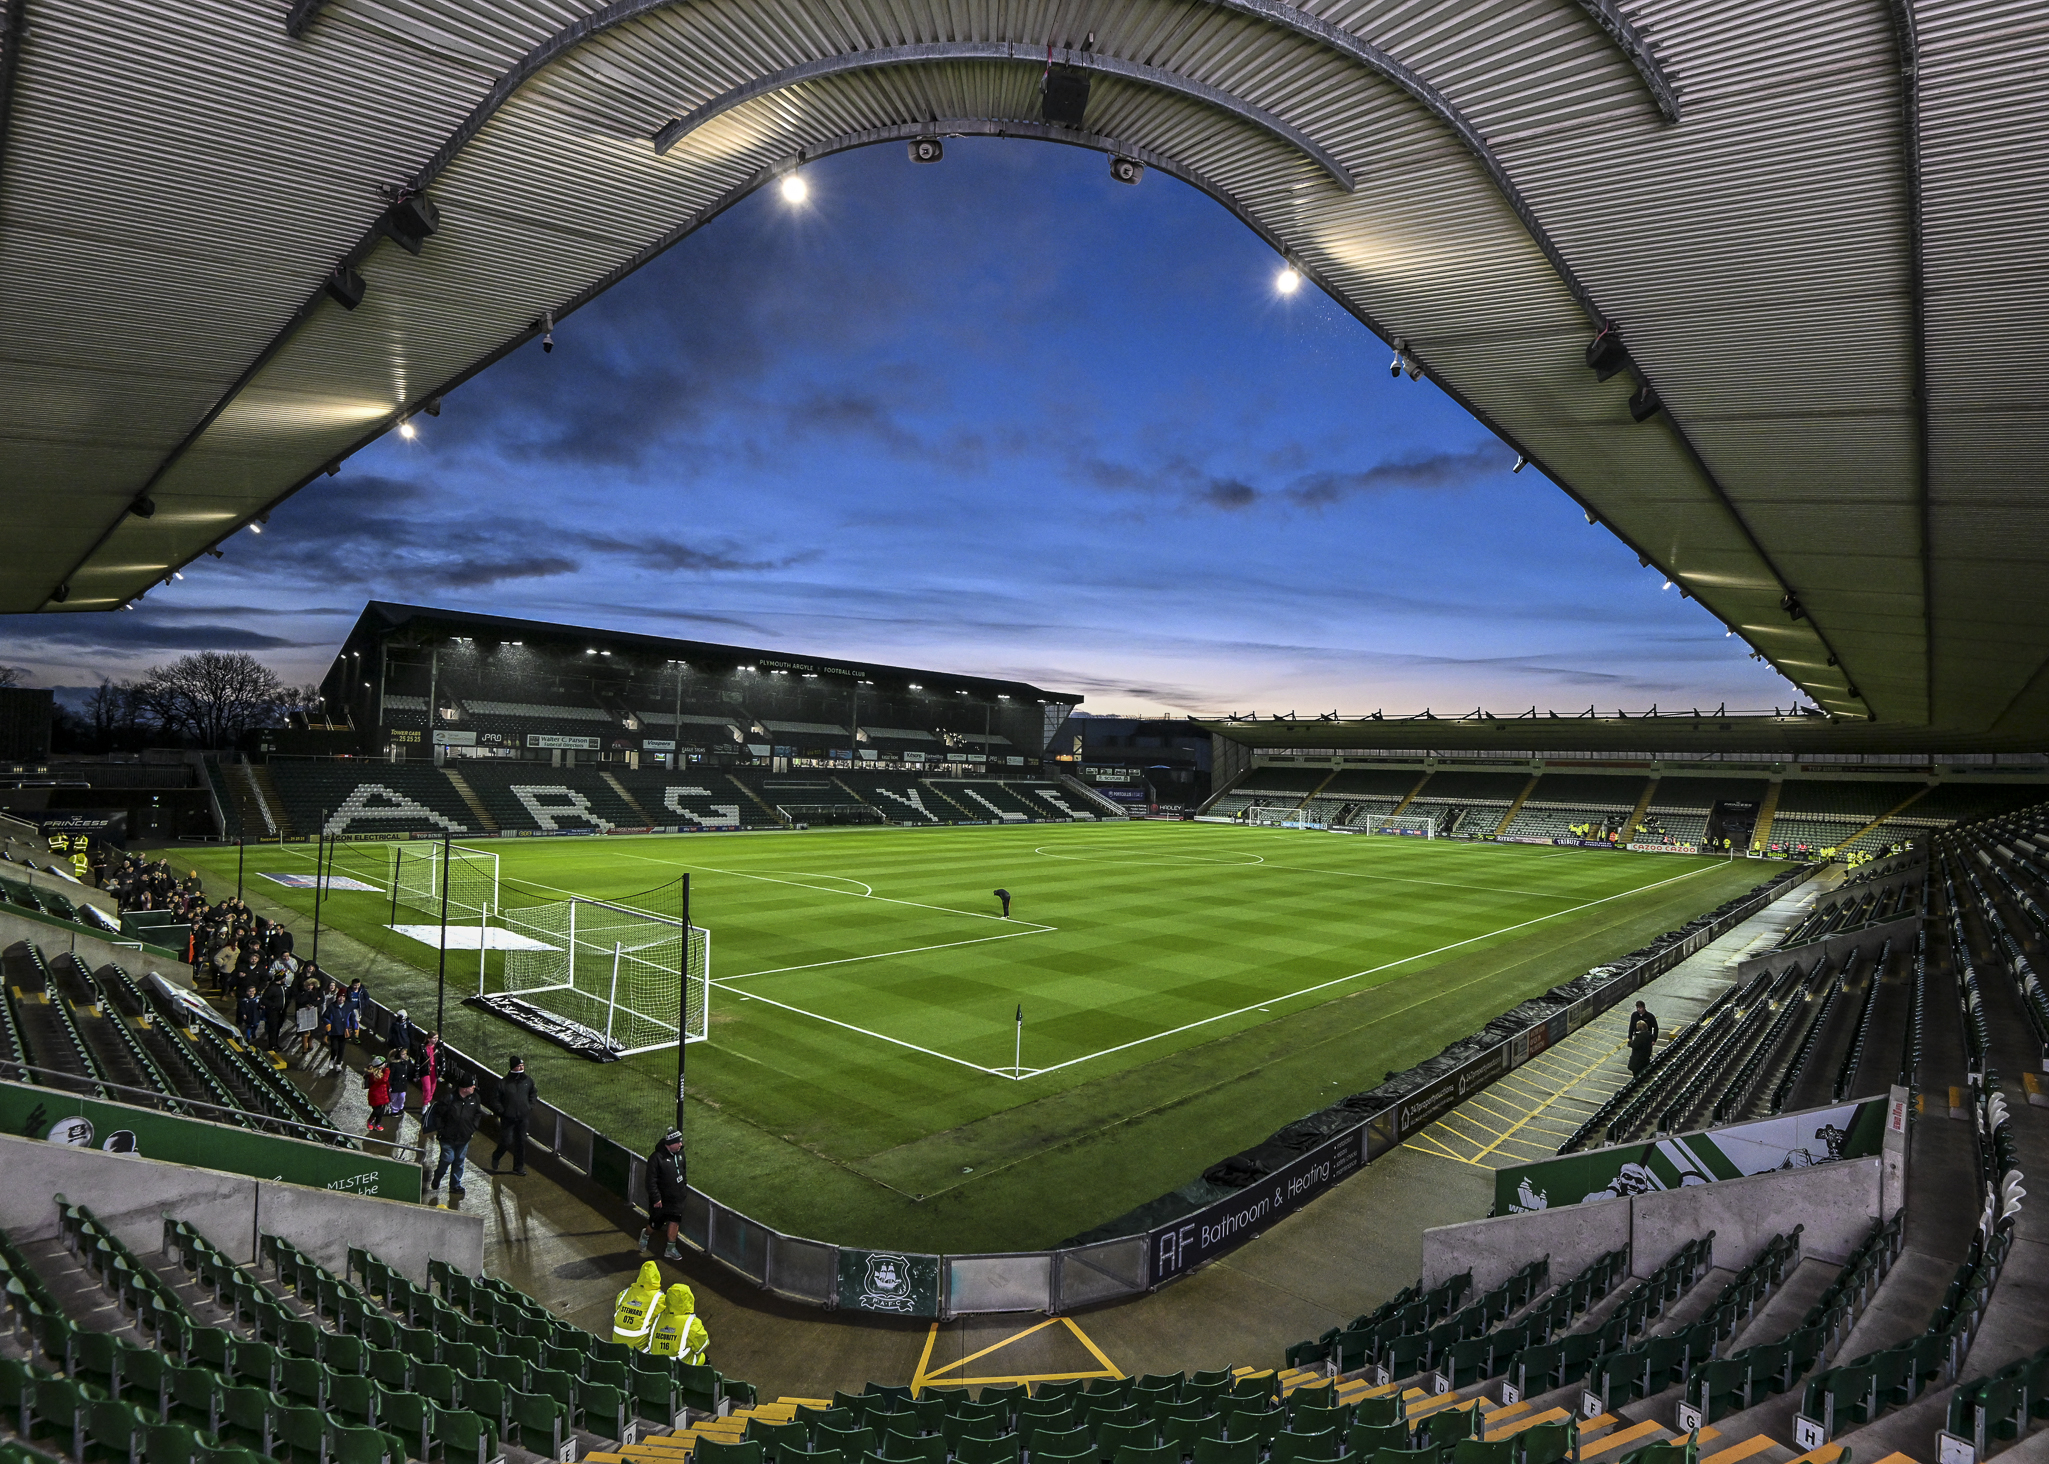 Home Park at twilight